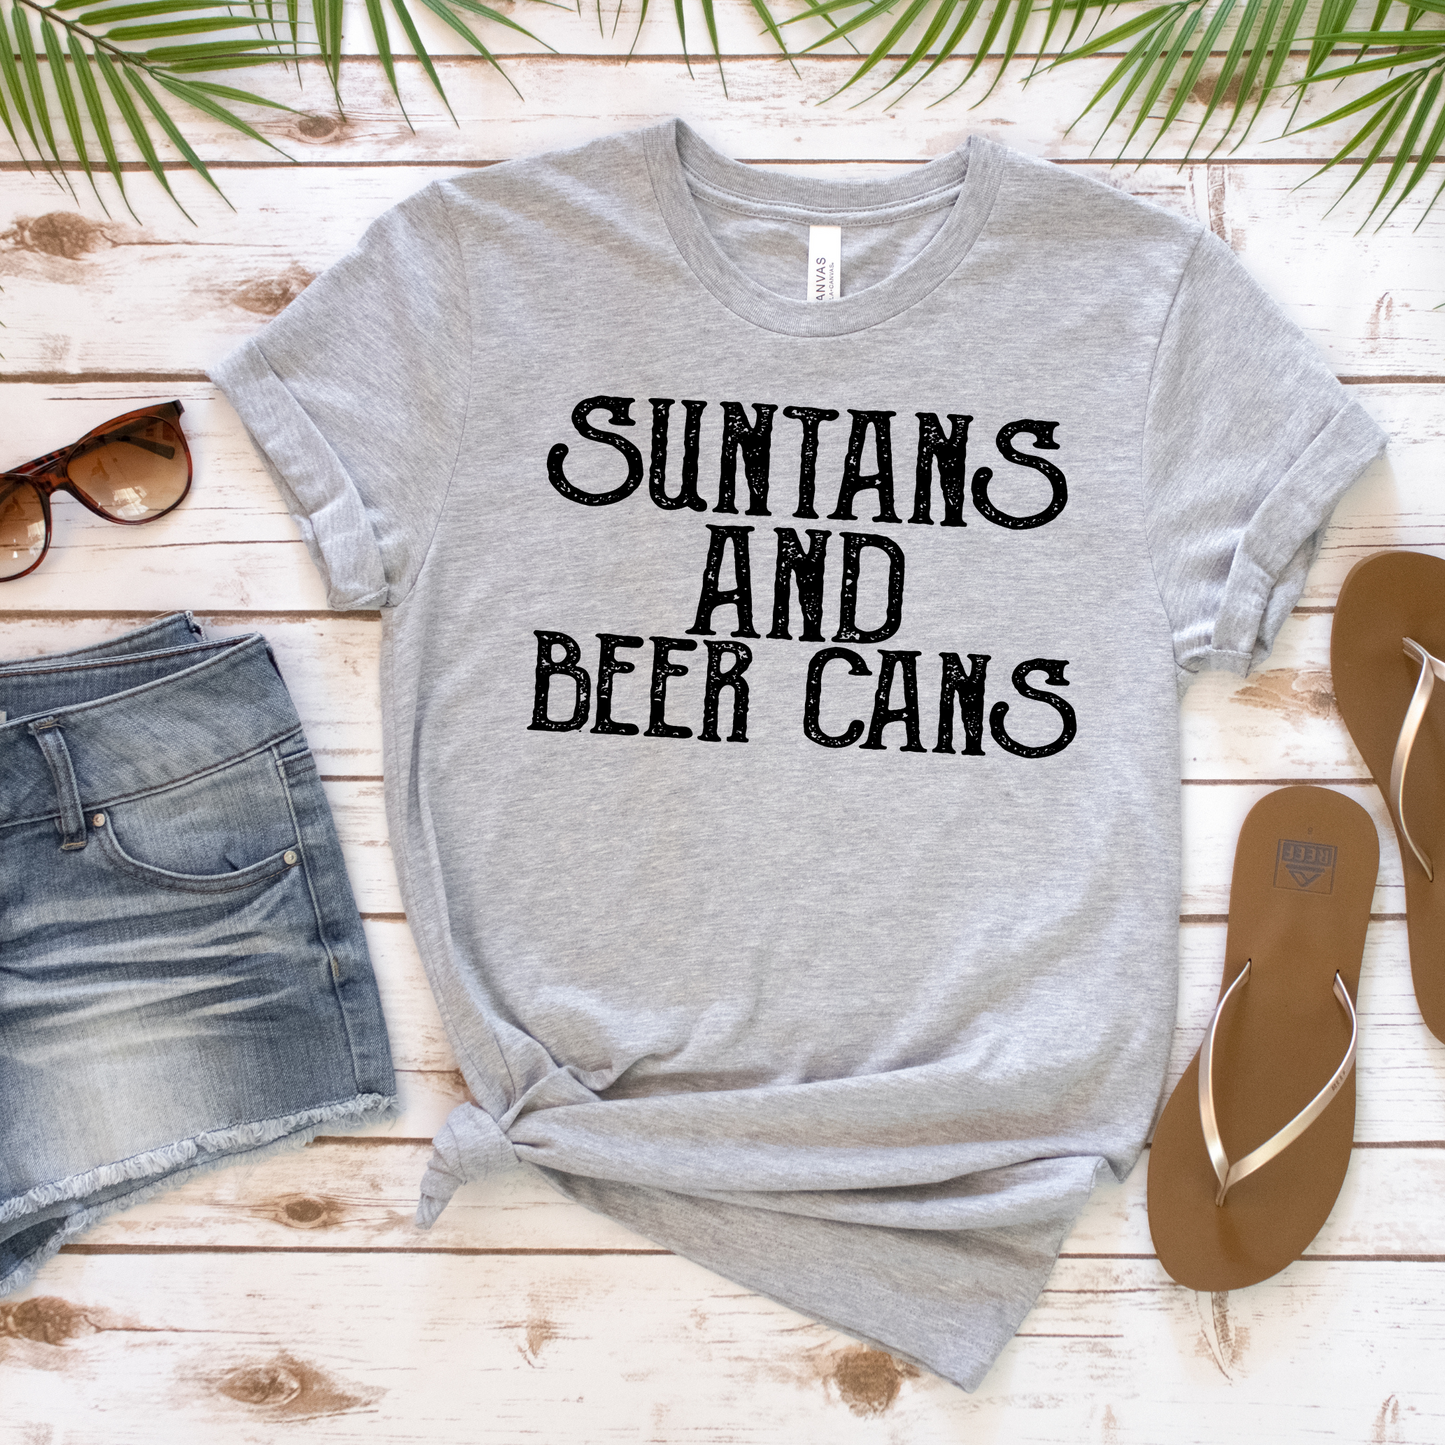 SUNTANS & BEER CANS Graphic Tee